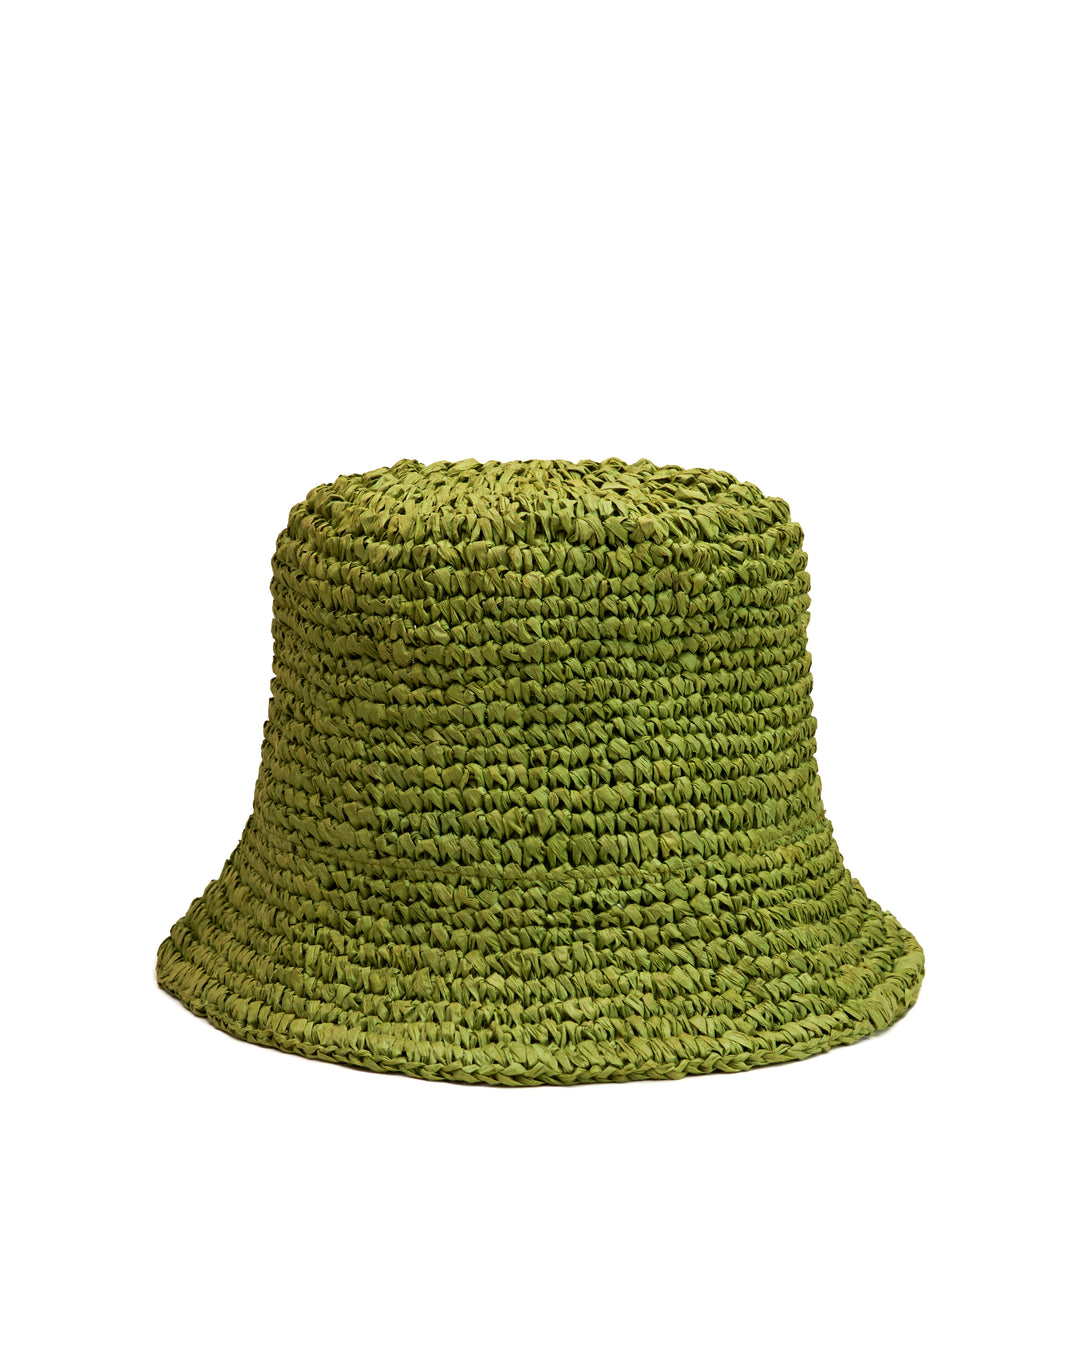 A green Amabile Raffia Hat by Kaffir, from Dandy Del Mar, isolated on a white background.